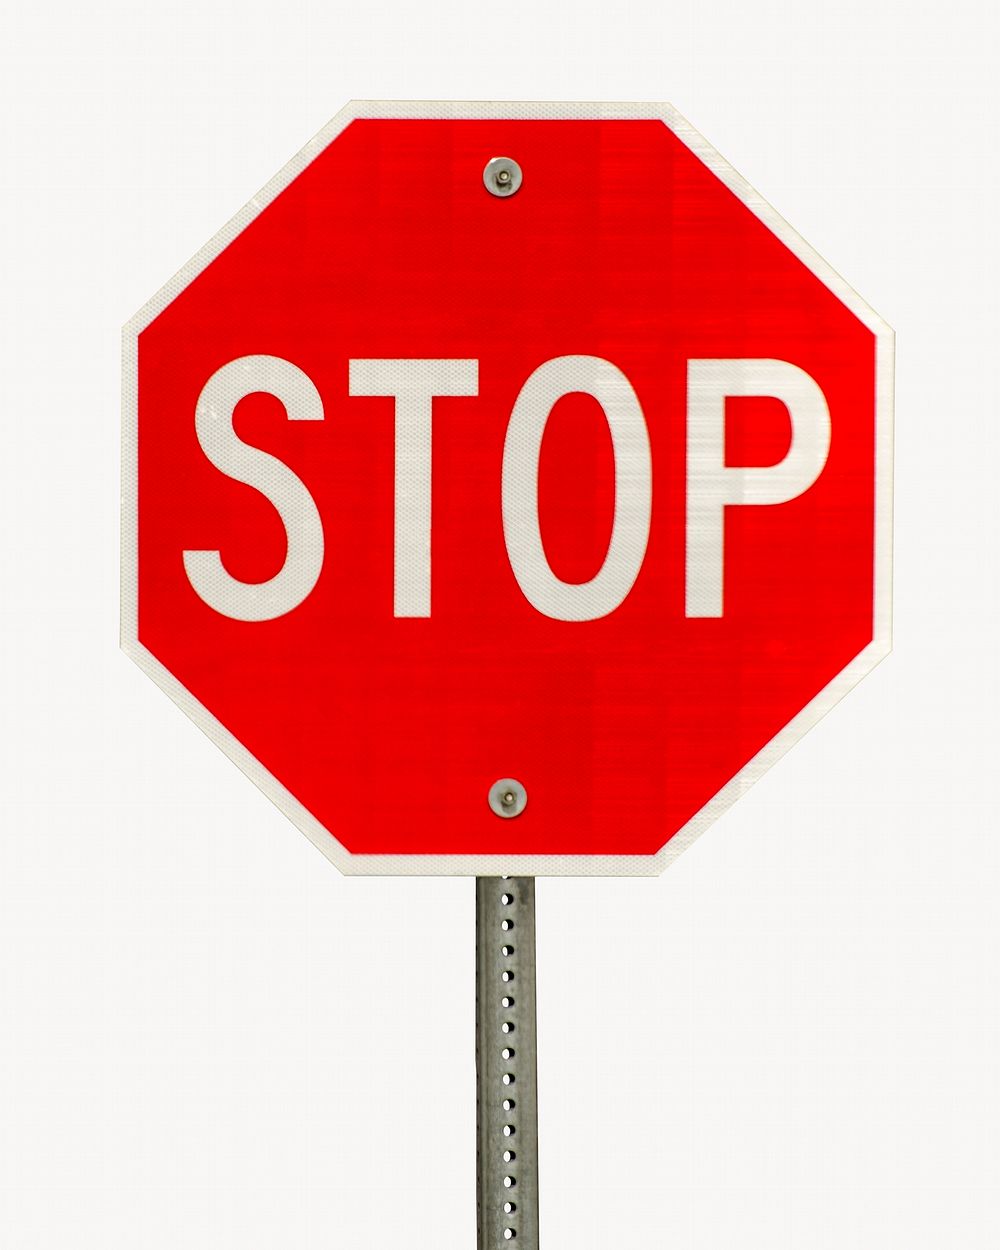 Road stop sign, isolated image